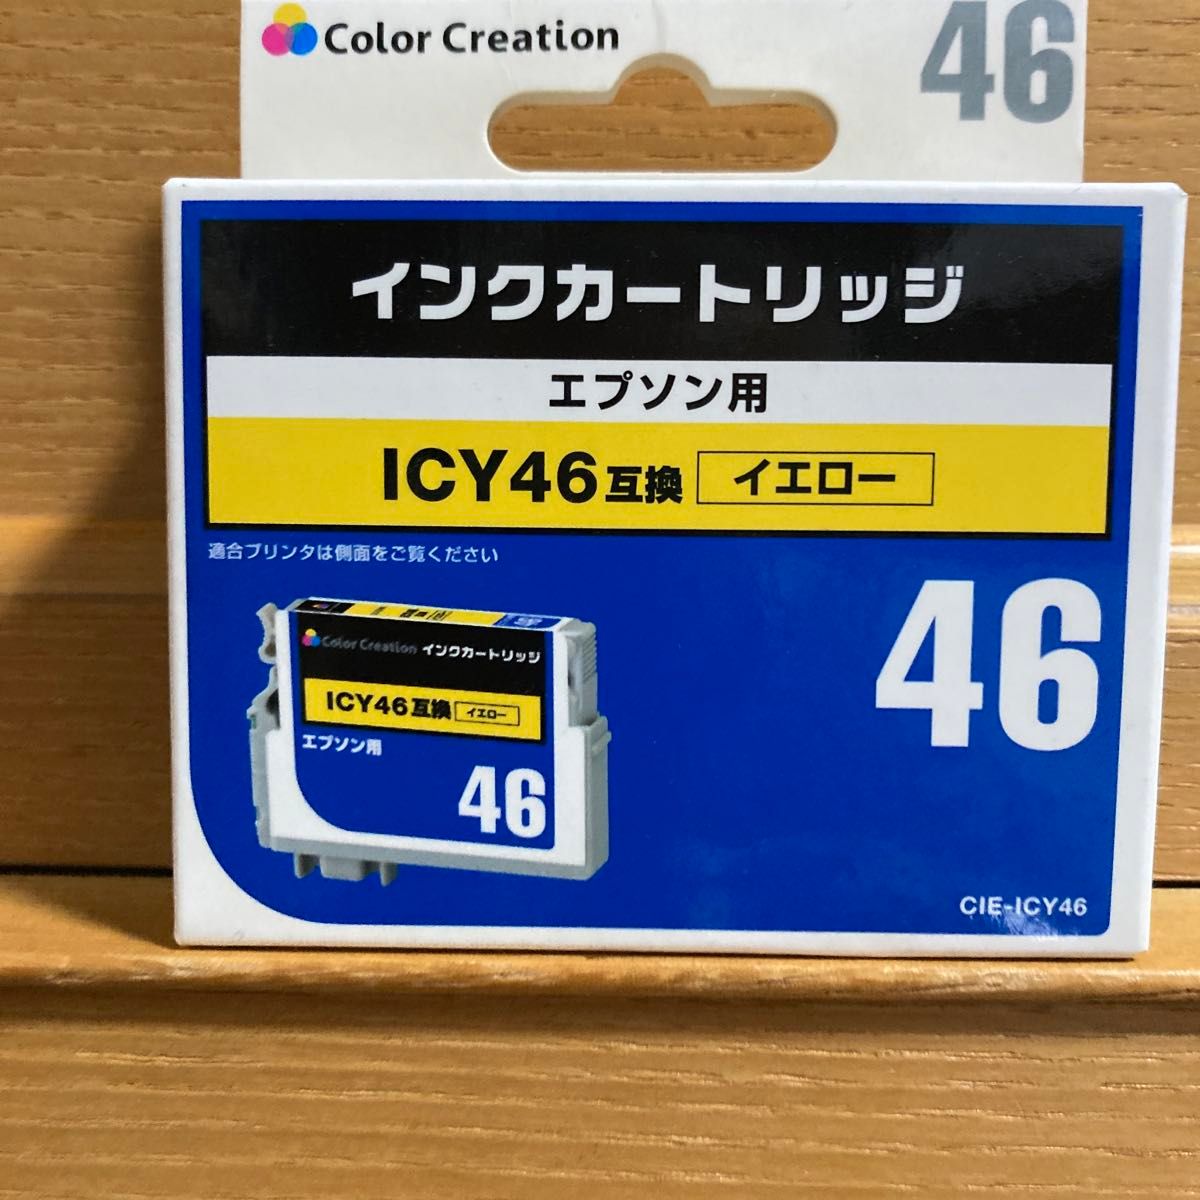 Color Creation EPSON ICY46互換 使い切り イエロー CIE-ICY46 【4544849453055】